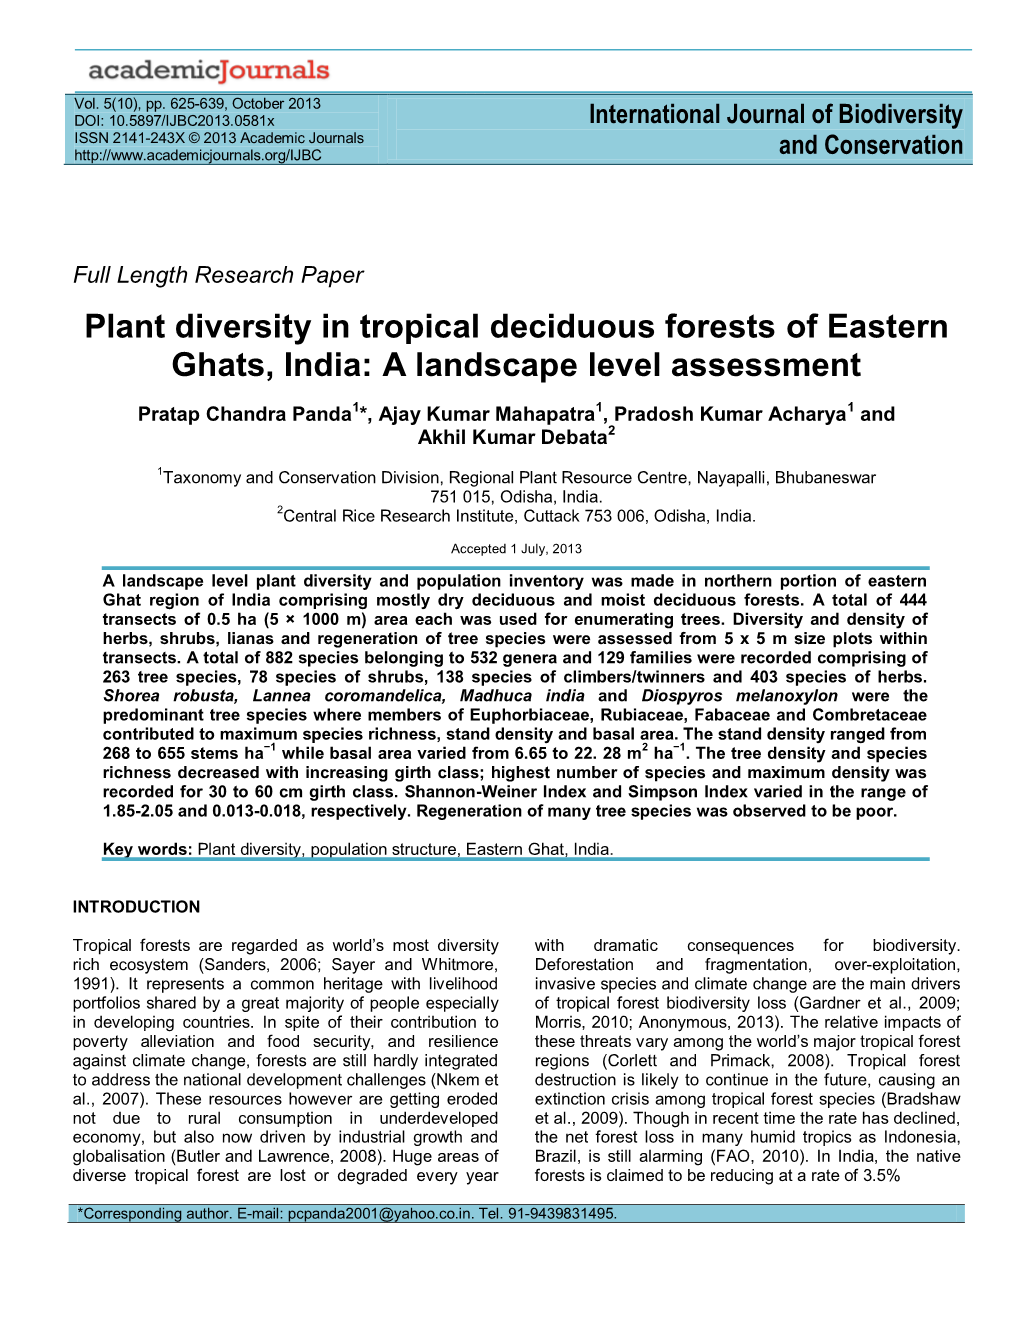 Plant Diversity in Tropical Deciduous Forests of Eastern Ghats, India: a Landscape Level Assessment